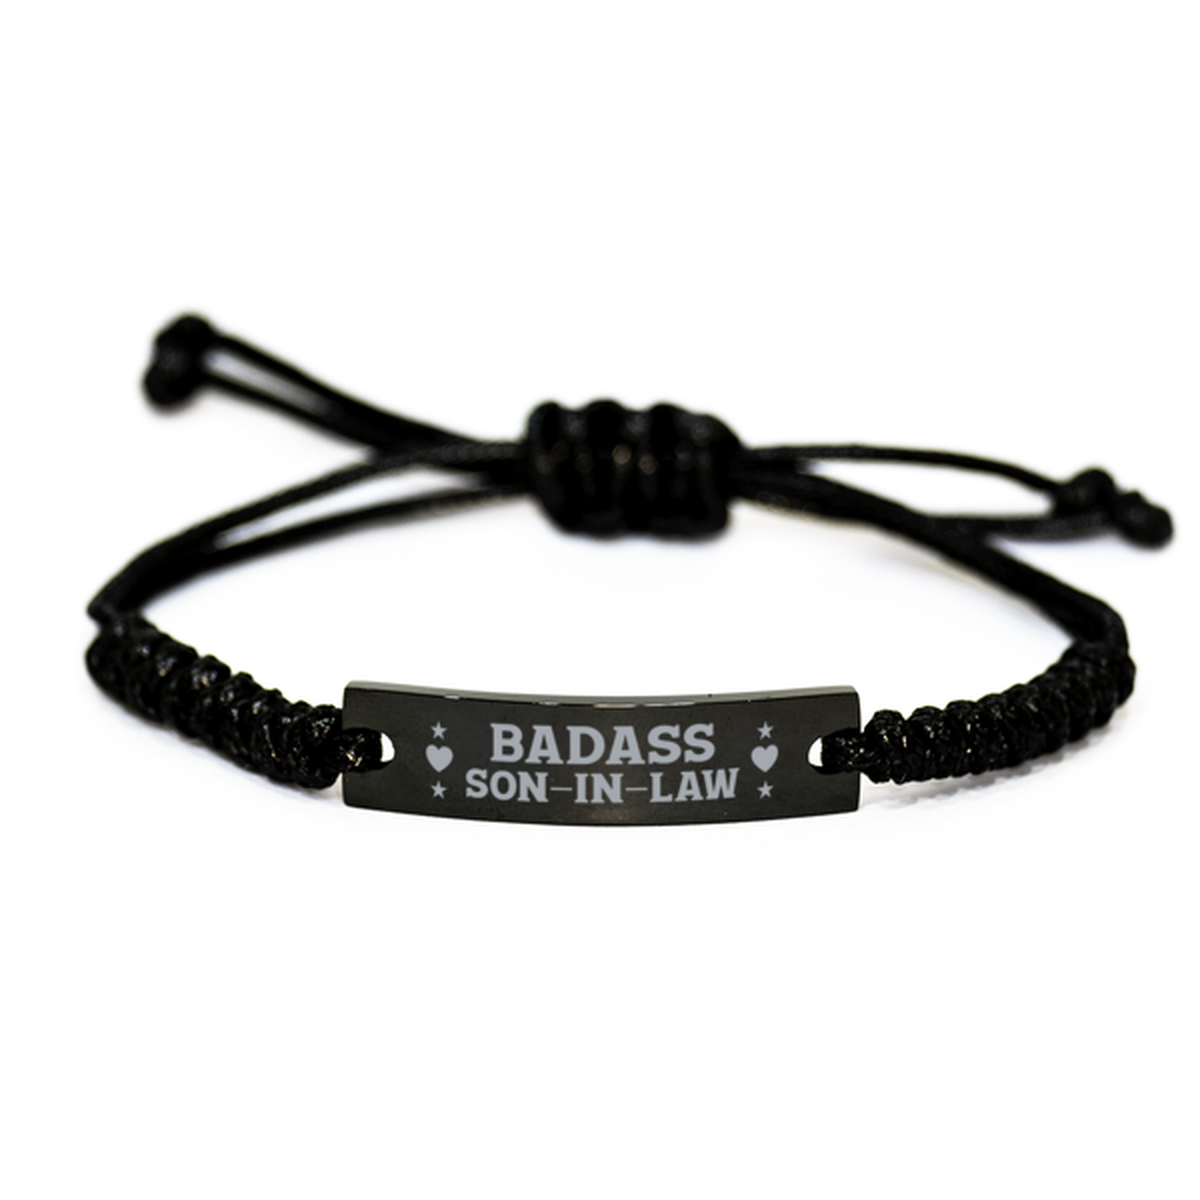 Son-in-law Rope Bracelet, Badass Son-in-law, Funny Family Gifts For Son-in-law From Dad Mom